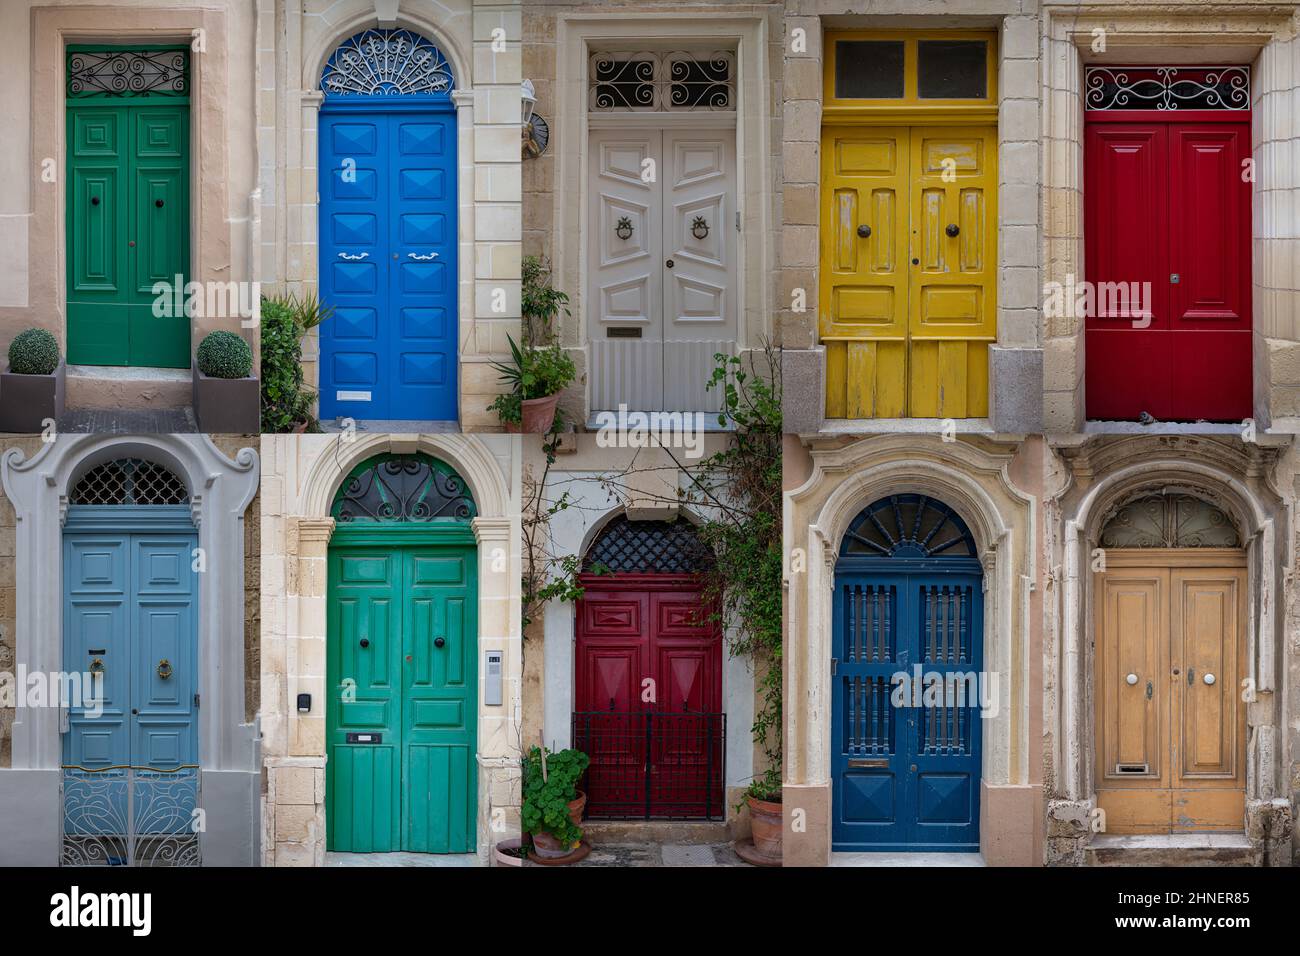 Collage of colorful front doors in Malta Stock Photo